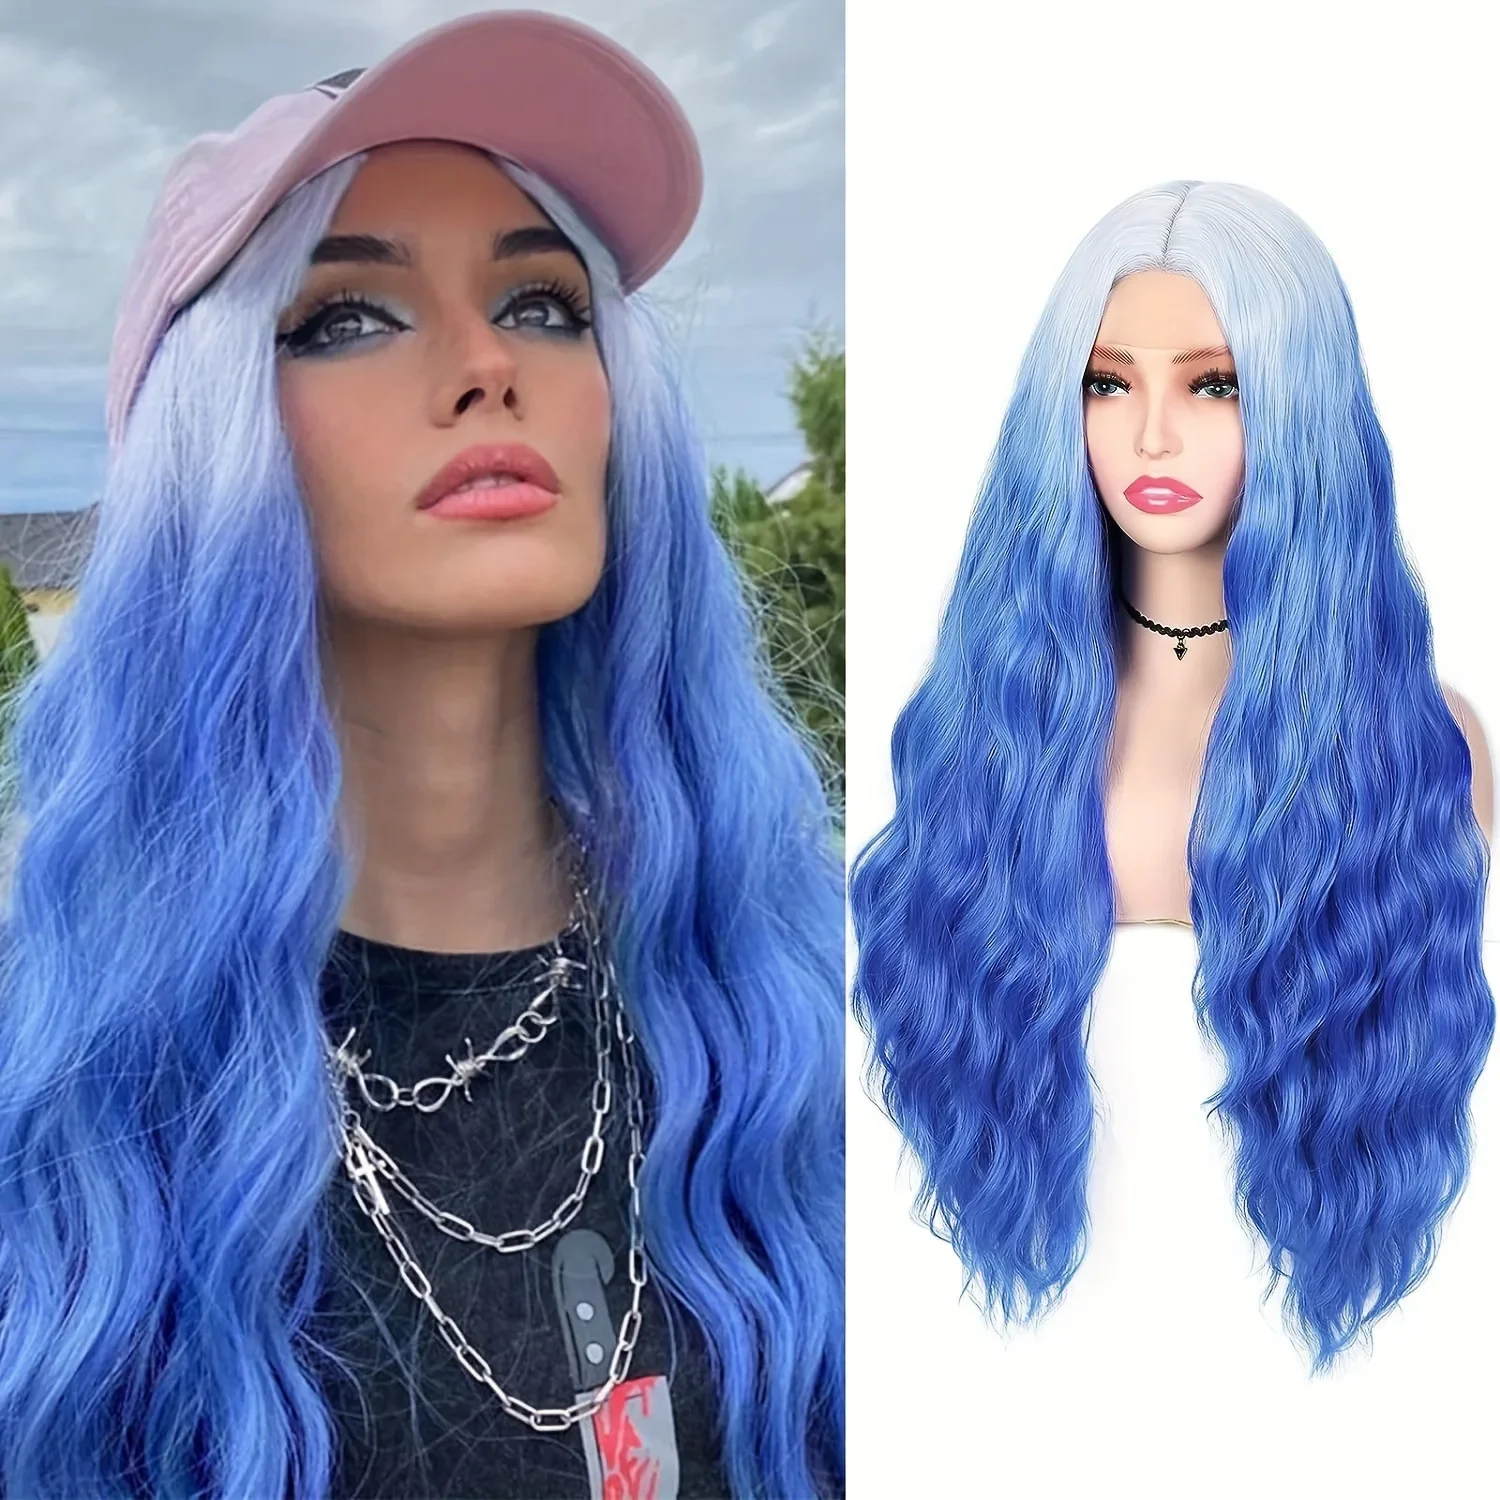 New Blue Long Wavy Blue Wigs for Women 28 Inch Natural Wave Curly Lace Part Wigs Synthetic Wig for Daily or Halloween Party дезодорант mon platin blue wave 80 мл